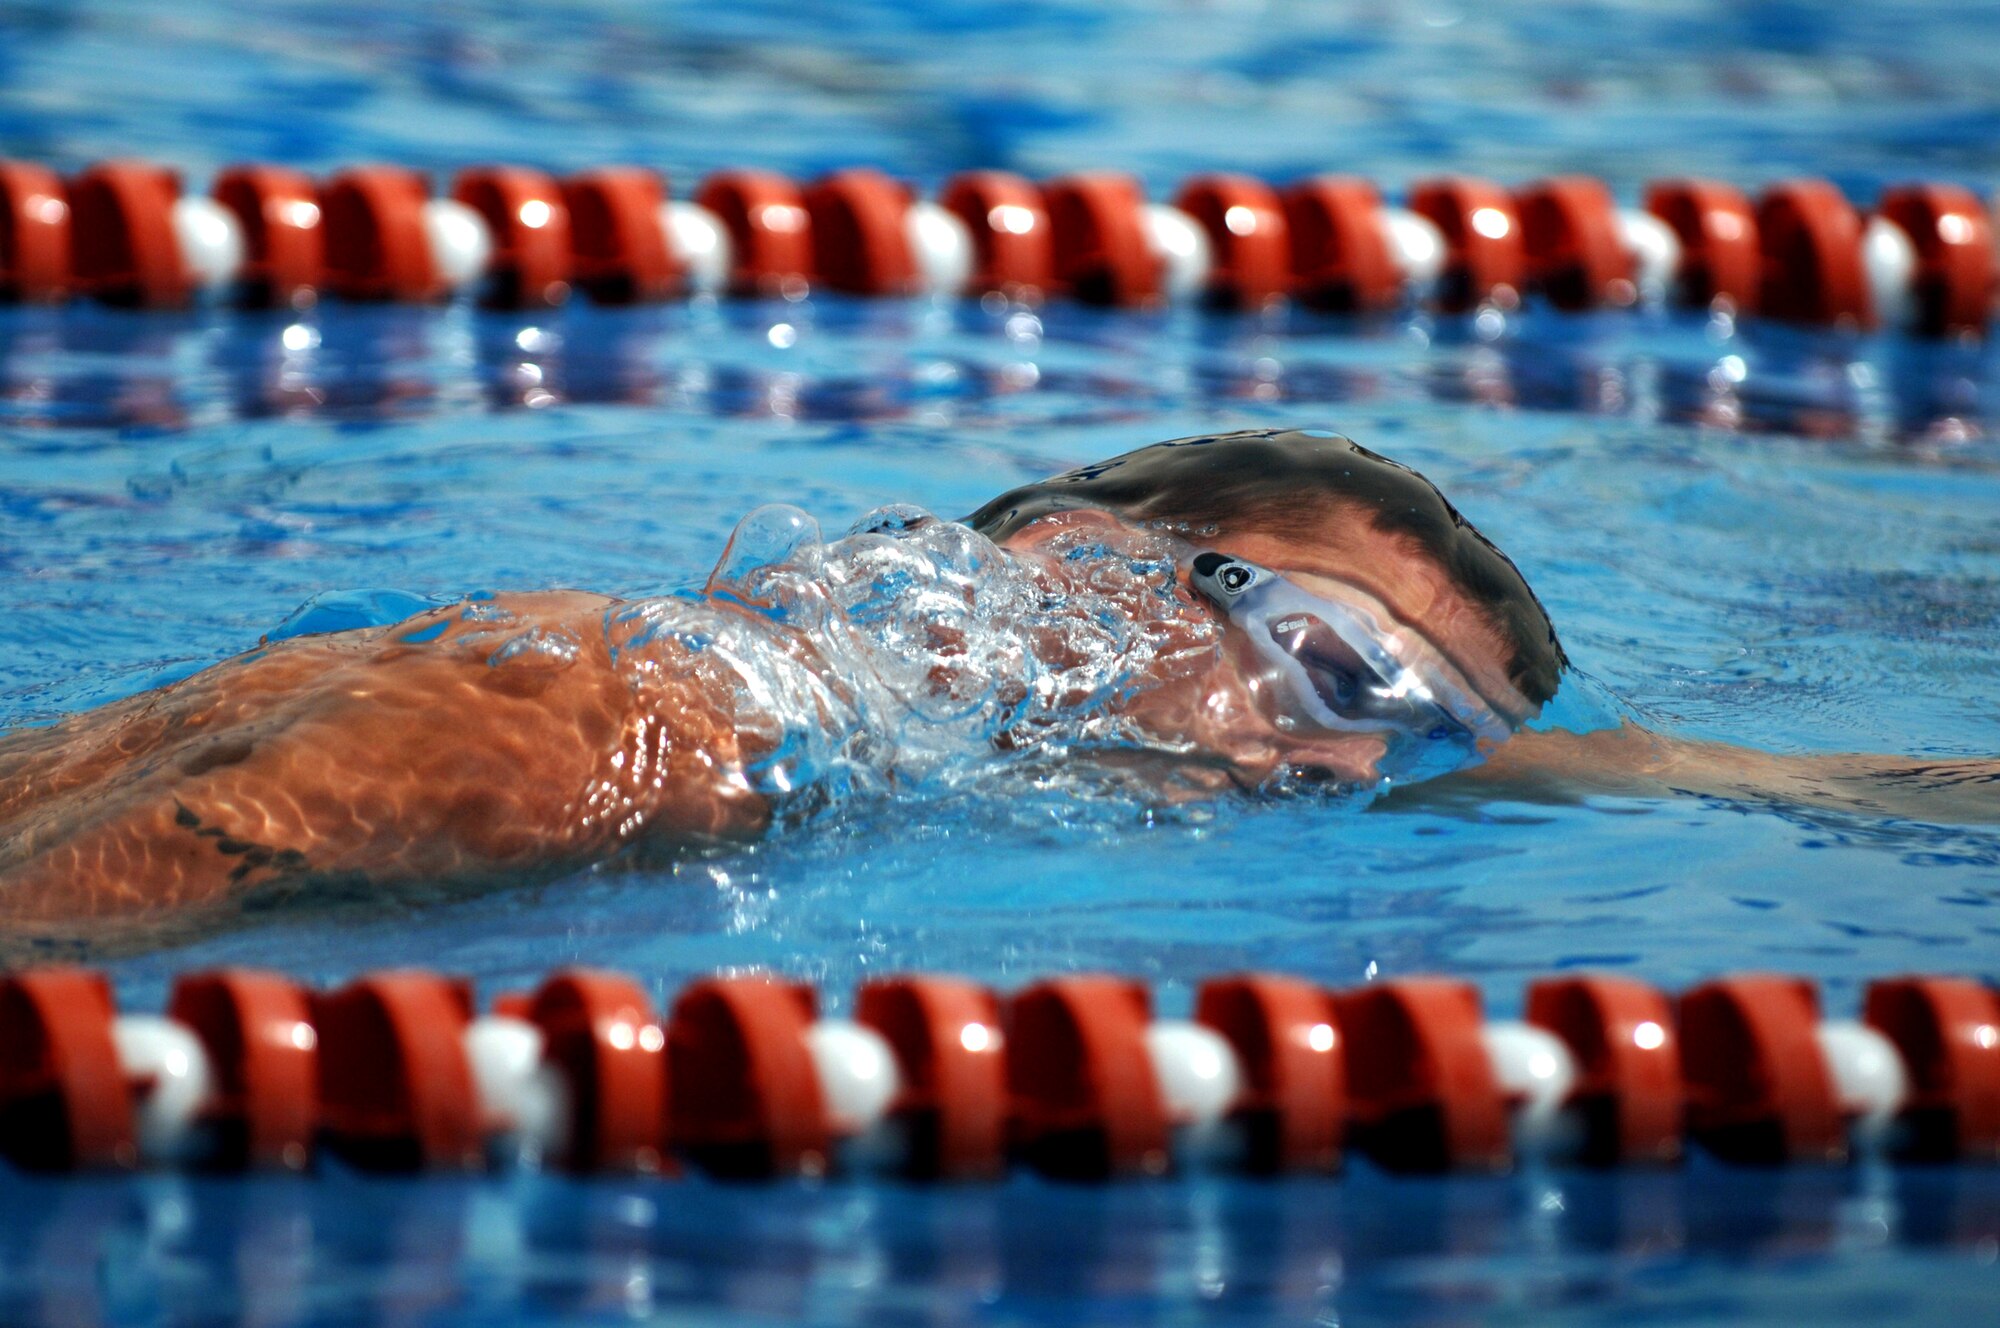 An Airman swims in the 1,600-meter relay during the 379th Air Expeditionary Wing Sports Day on Sunday, April 23, 2006. Other events at the deployed location in Southwest Asia included volleyball, home run derby, basketball, dodgeball, and a "strongman and woman" contest.  (U.S. Air Force photo/Staff Sgt. Joshua Strang) 

